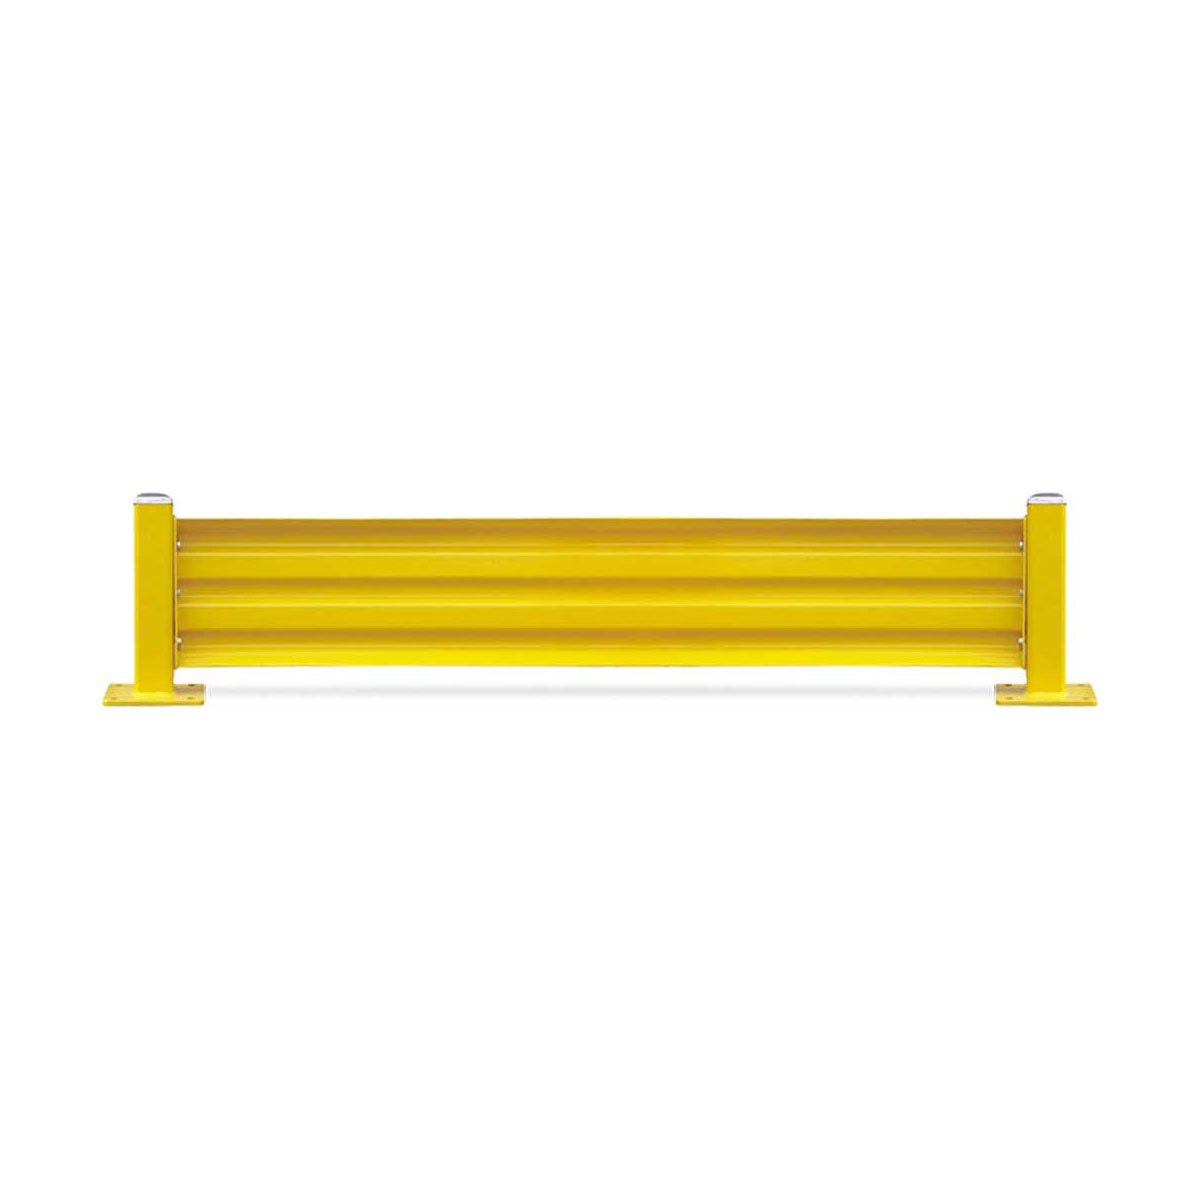 Buy Traffic Barrier - GuardX  available at Astrolift NZ